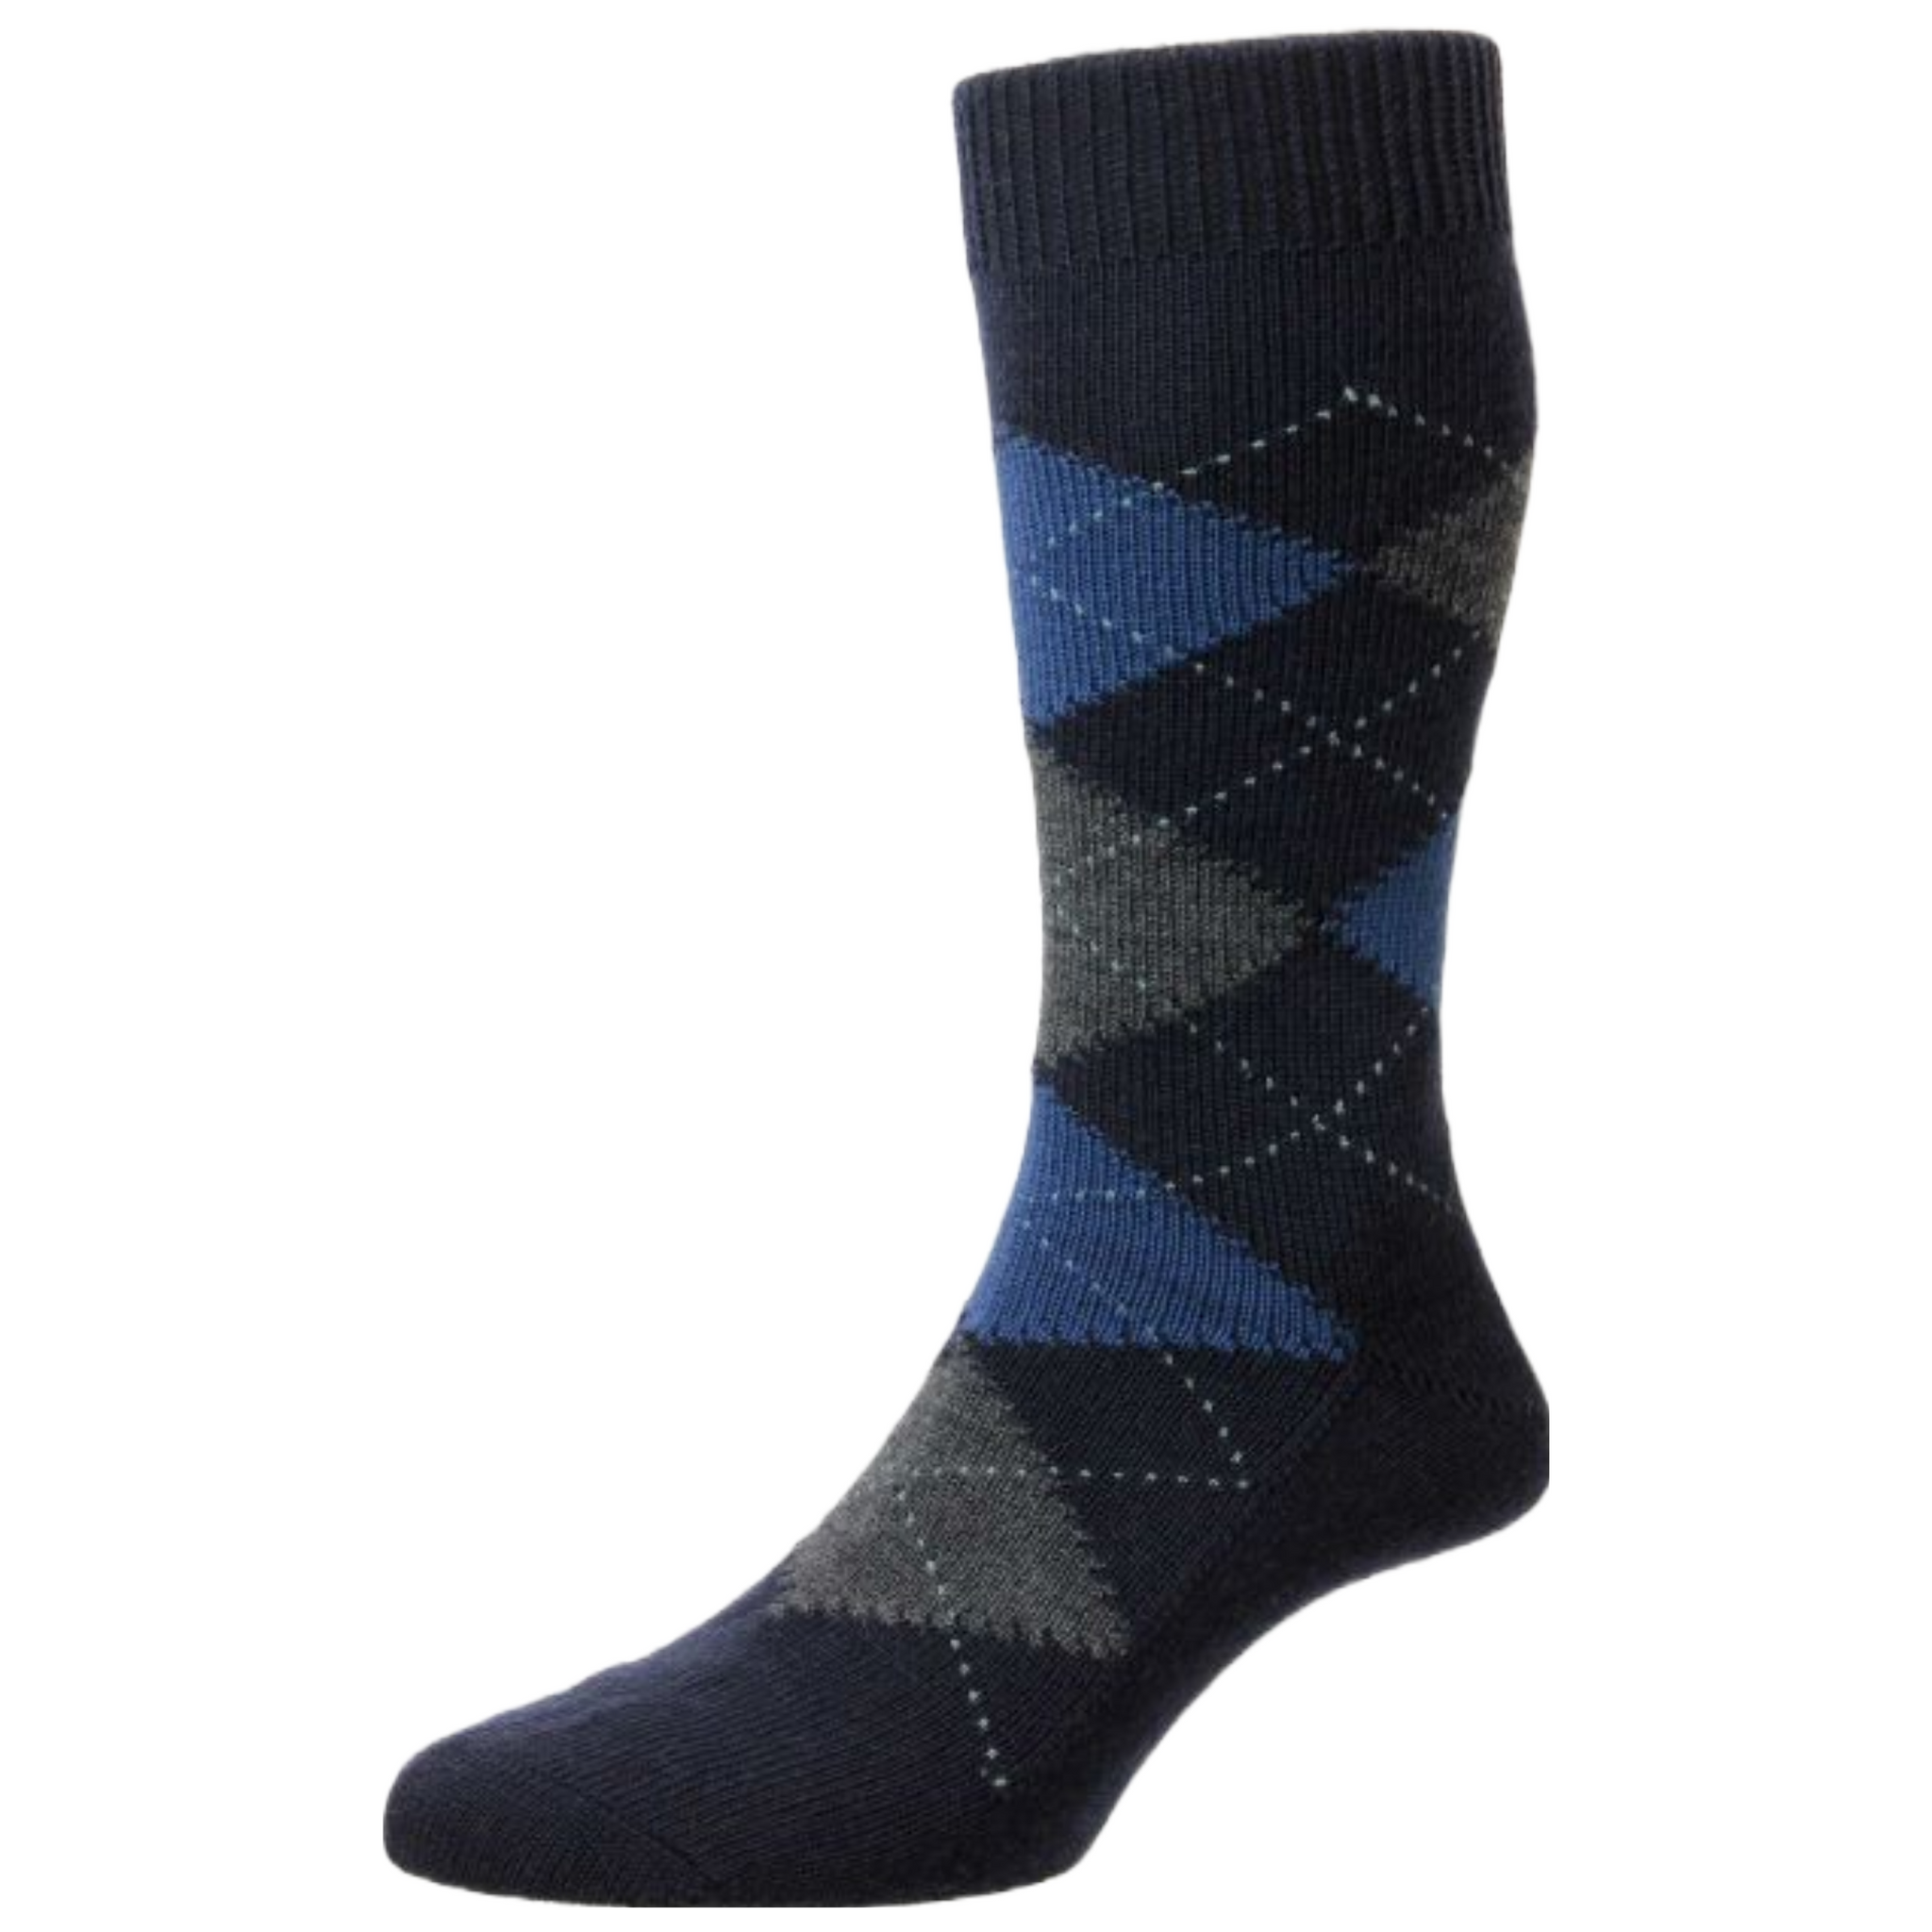 classic argyle pattern in navy.